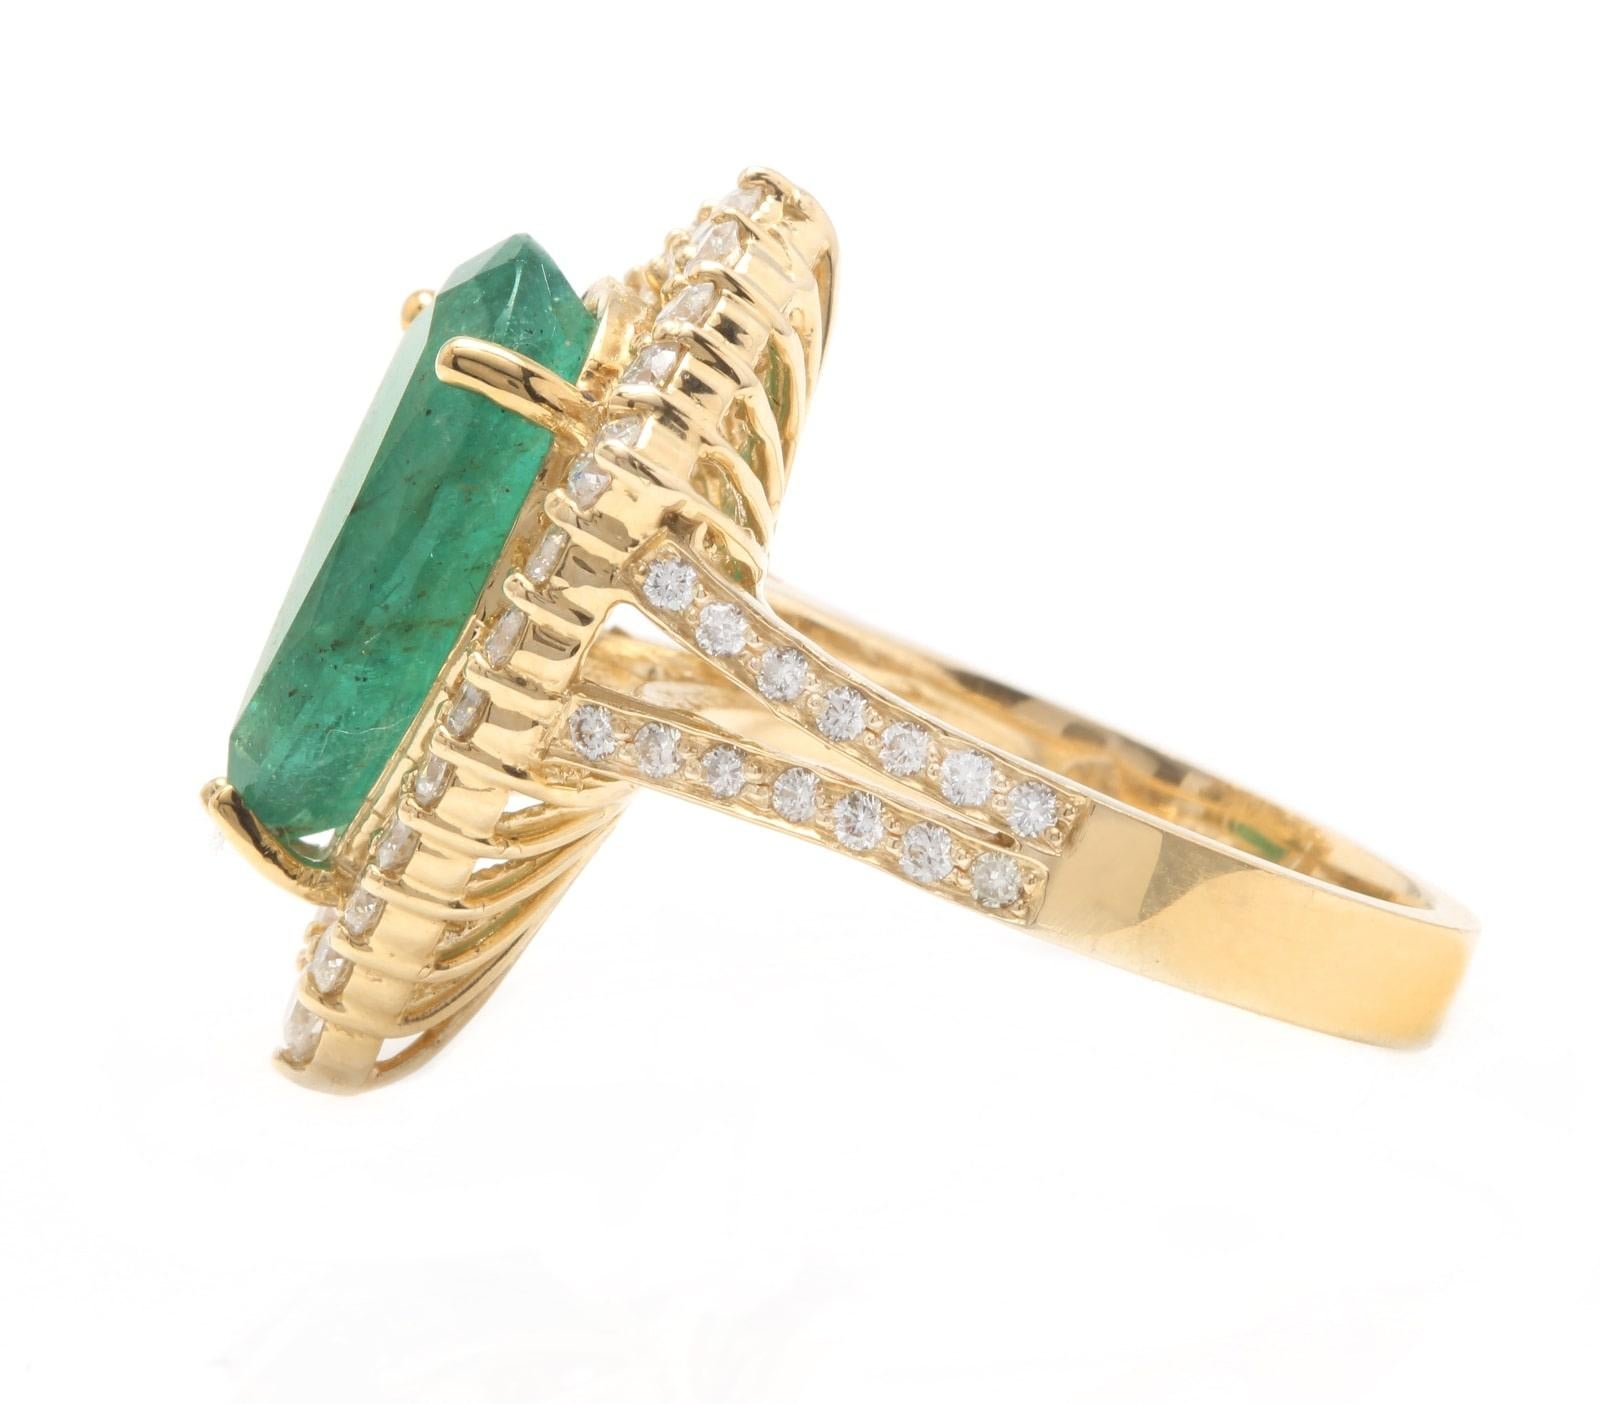 Emerald Cut 8.20 Carat Natural Emerald and Diamond 14 Karat Solid Yellow Gold Ring For Sale